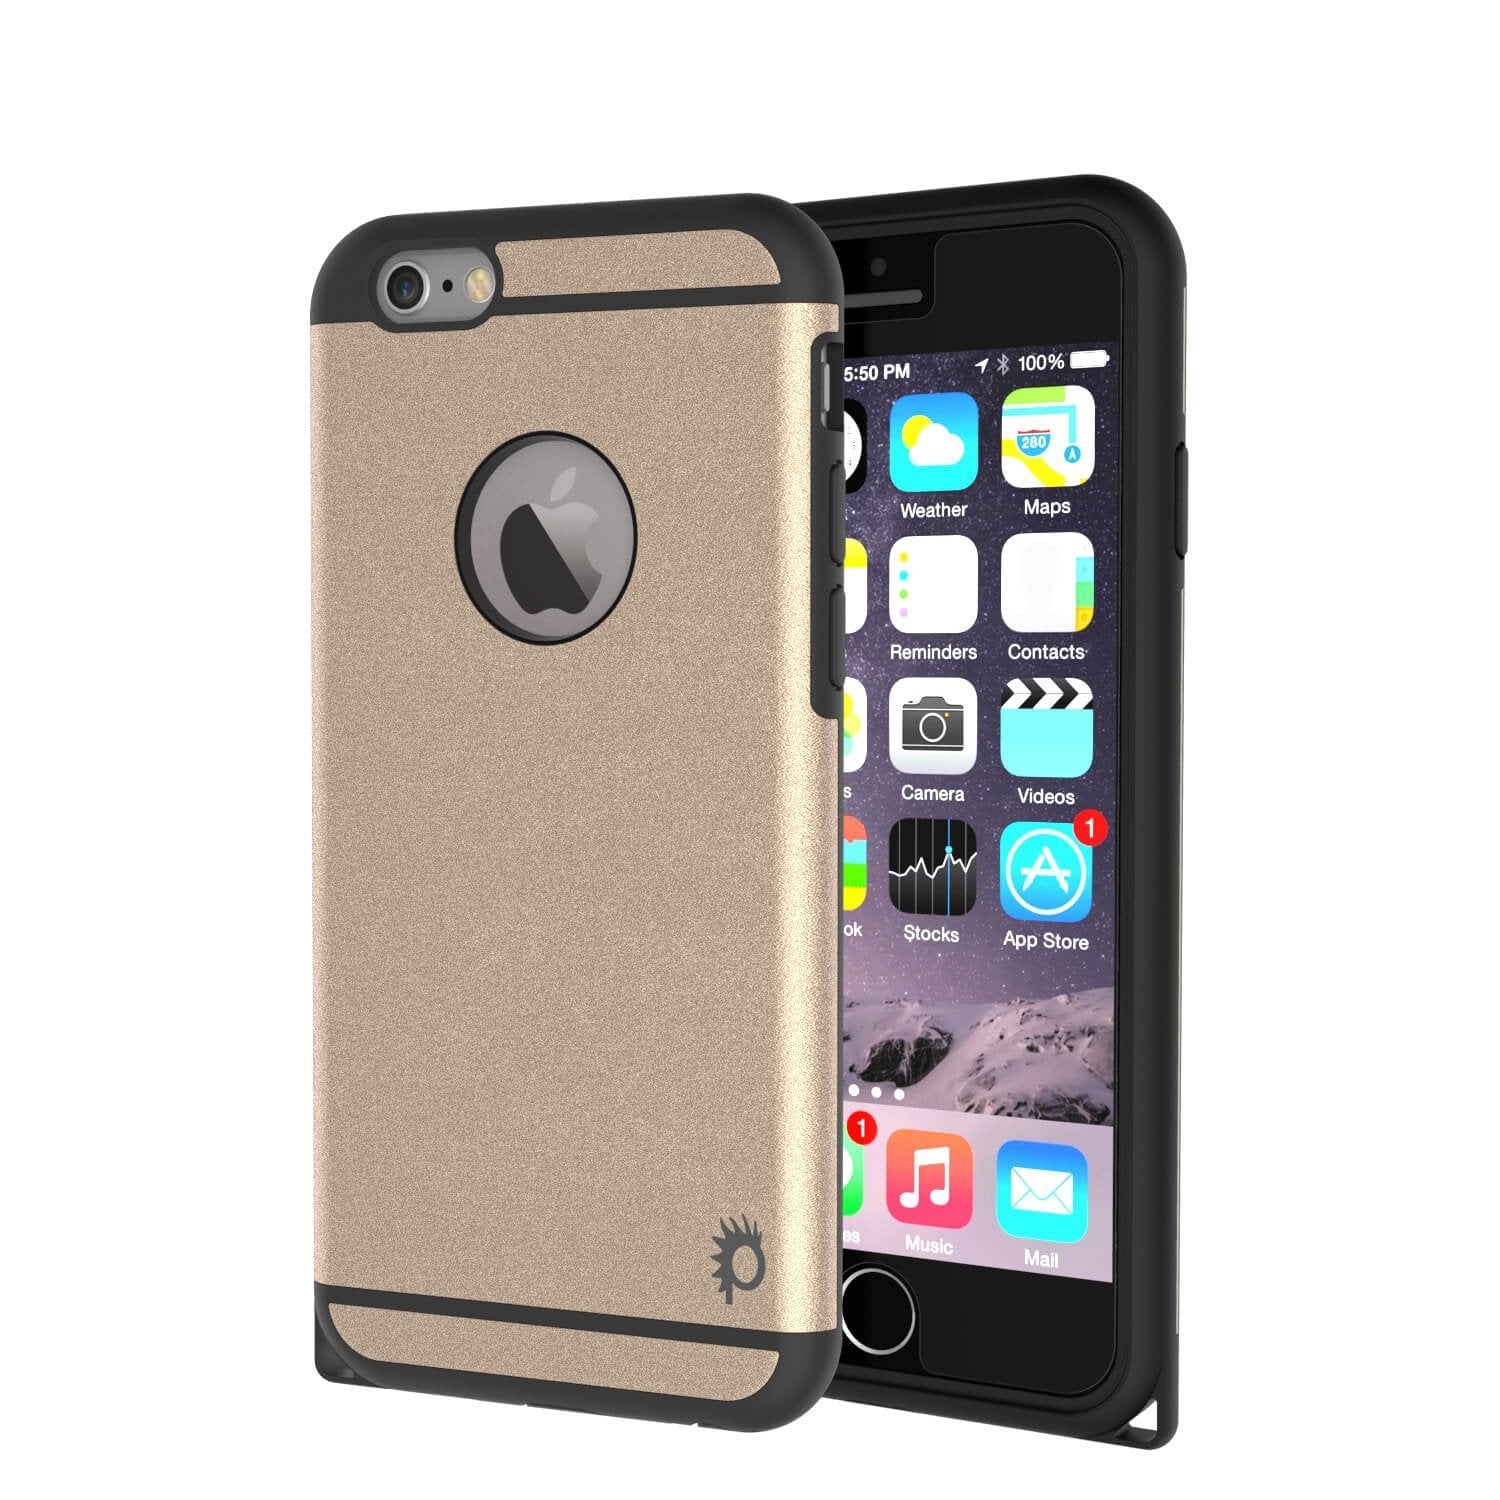 iPhone 5s/5/SE Case PunkCase Galactic Gold Series Slim w/ Tempered Glass | Lifetime Warranty